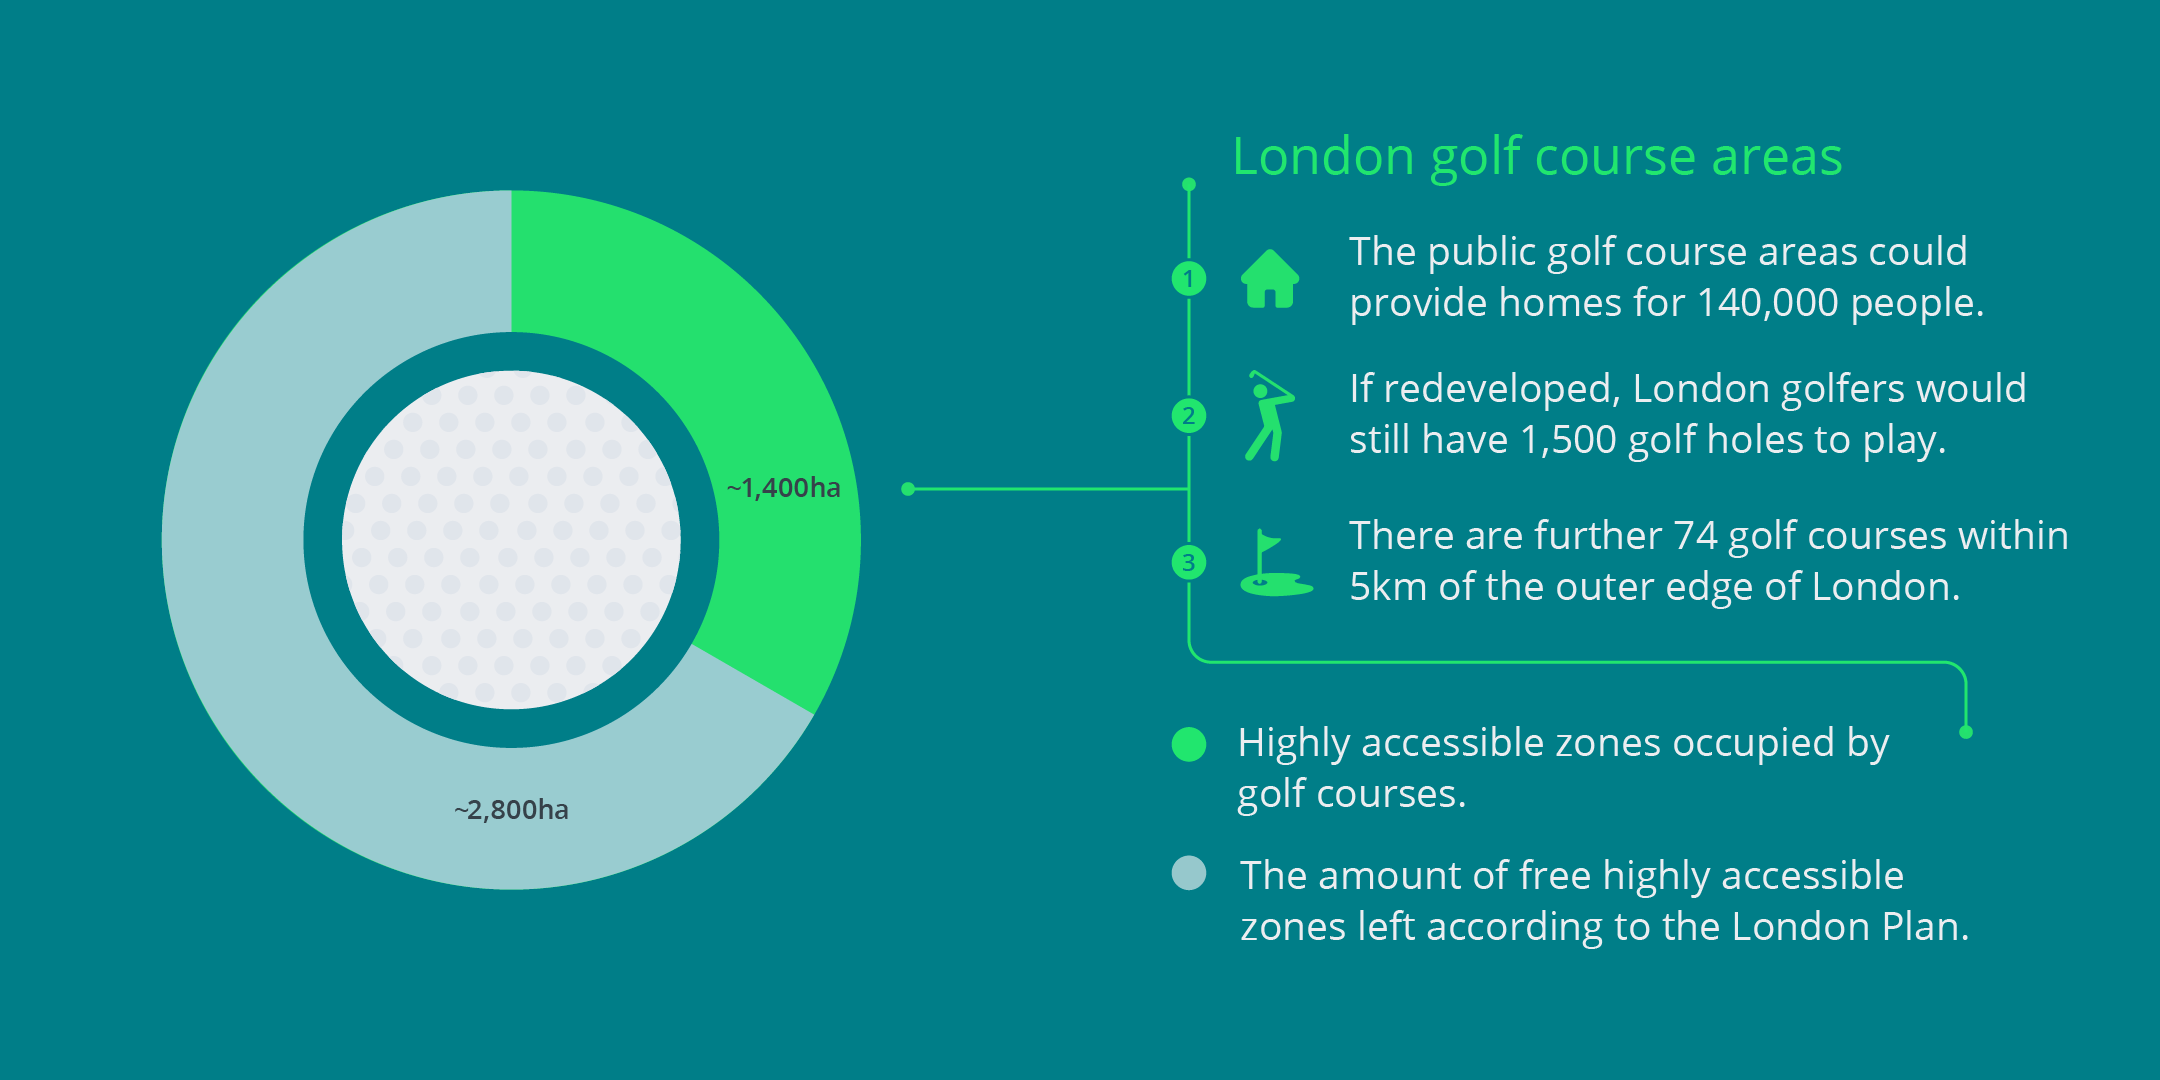 Public golf course areas could provide homes for 140,000 people. If redeveloped, London golfers would still have 1,500 holes to play. There are further 74 golf courses within 5km of the outer edge of London. 1,400ha of highly accessible zones. 2,800ha free highly accessible zones left according to the London Plan